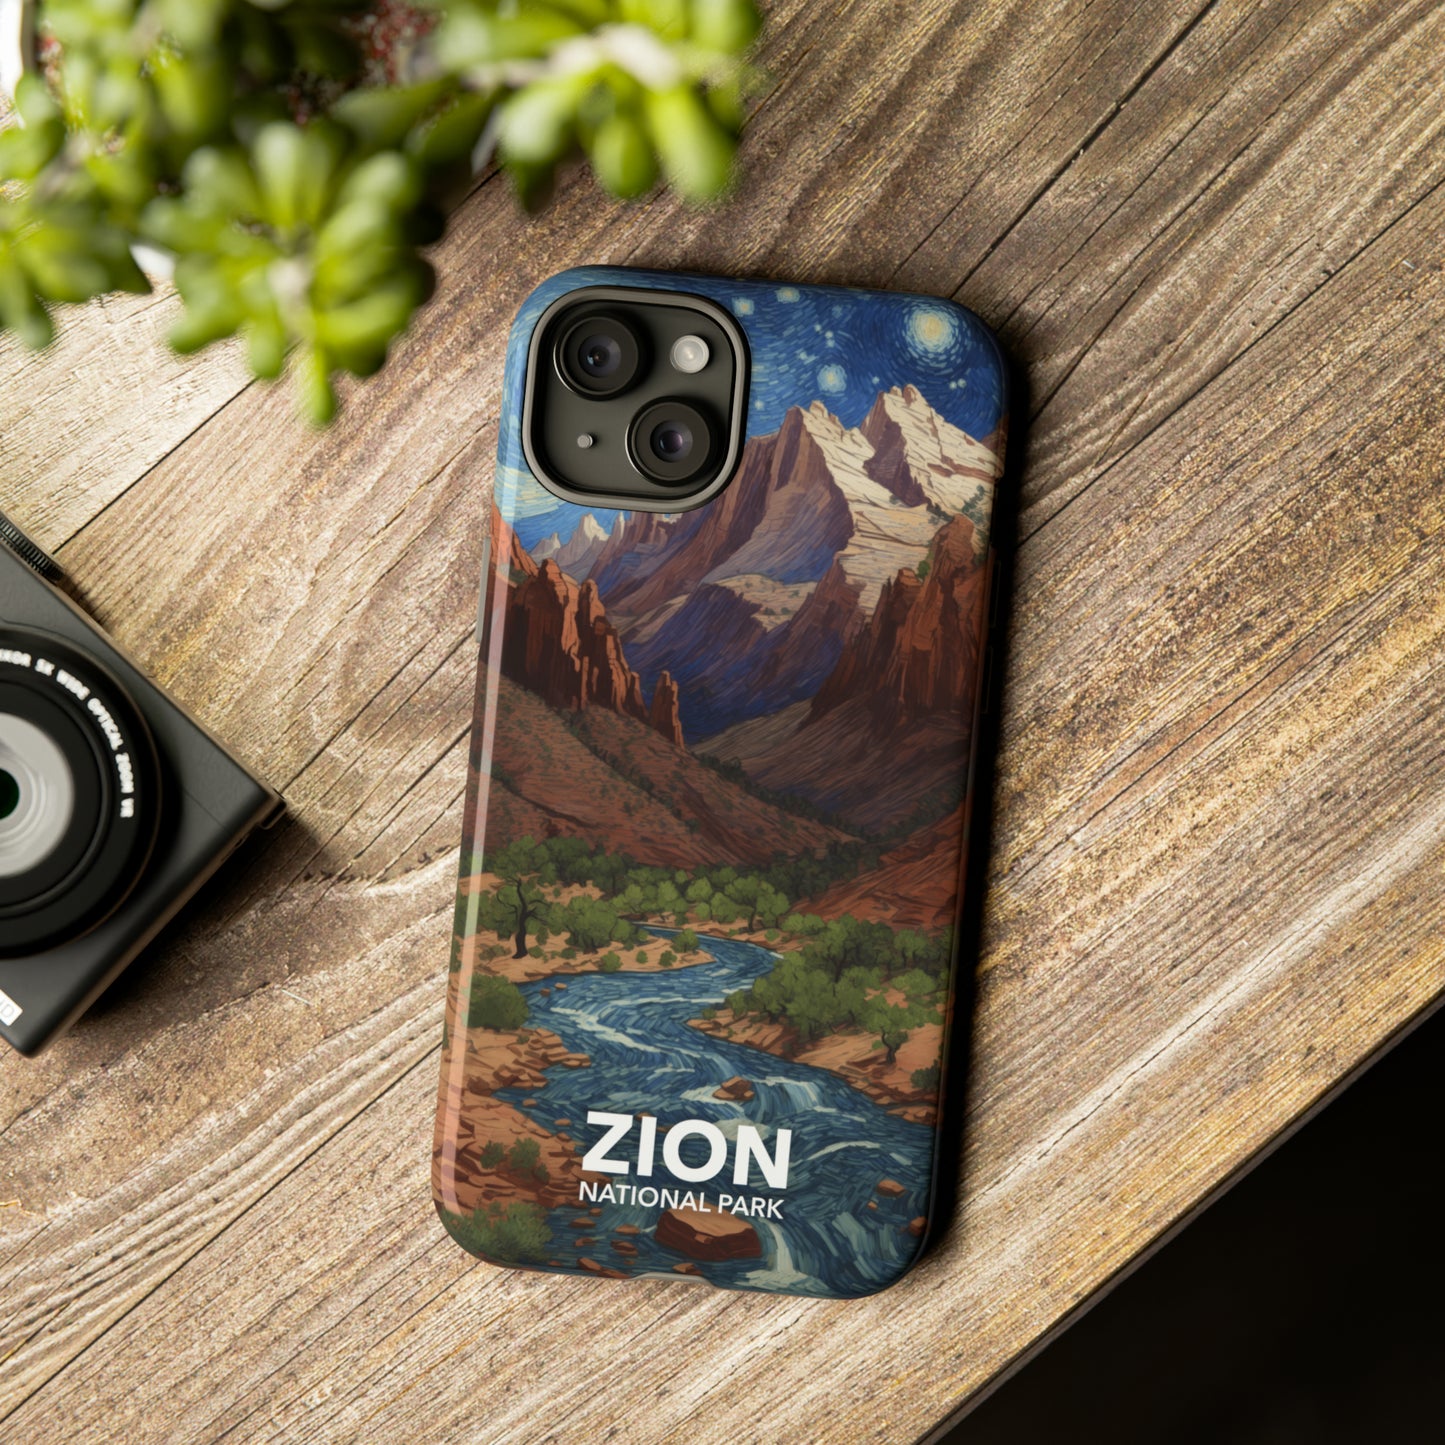 Zion National Park Phone Case - Starry Night